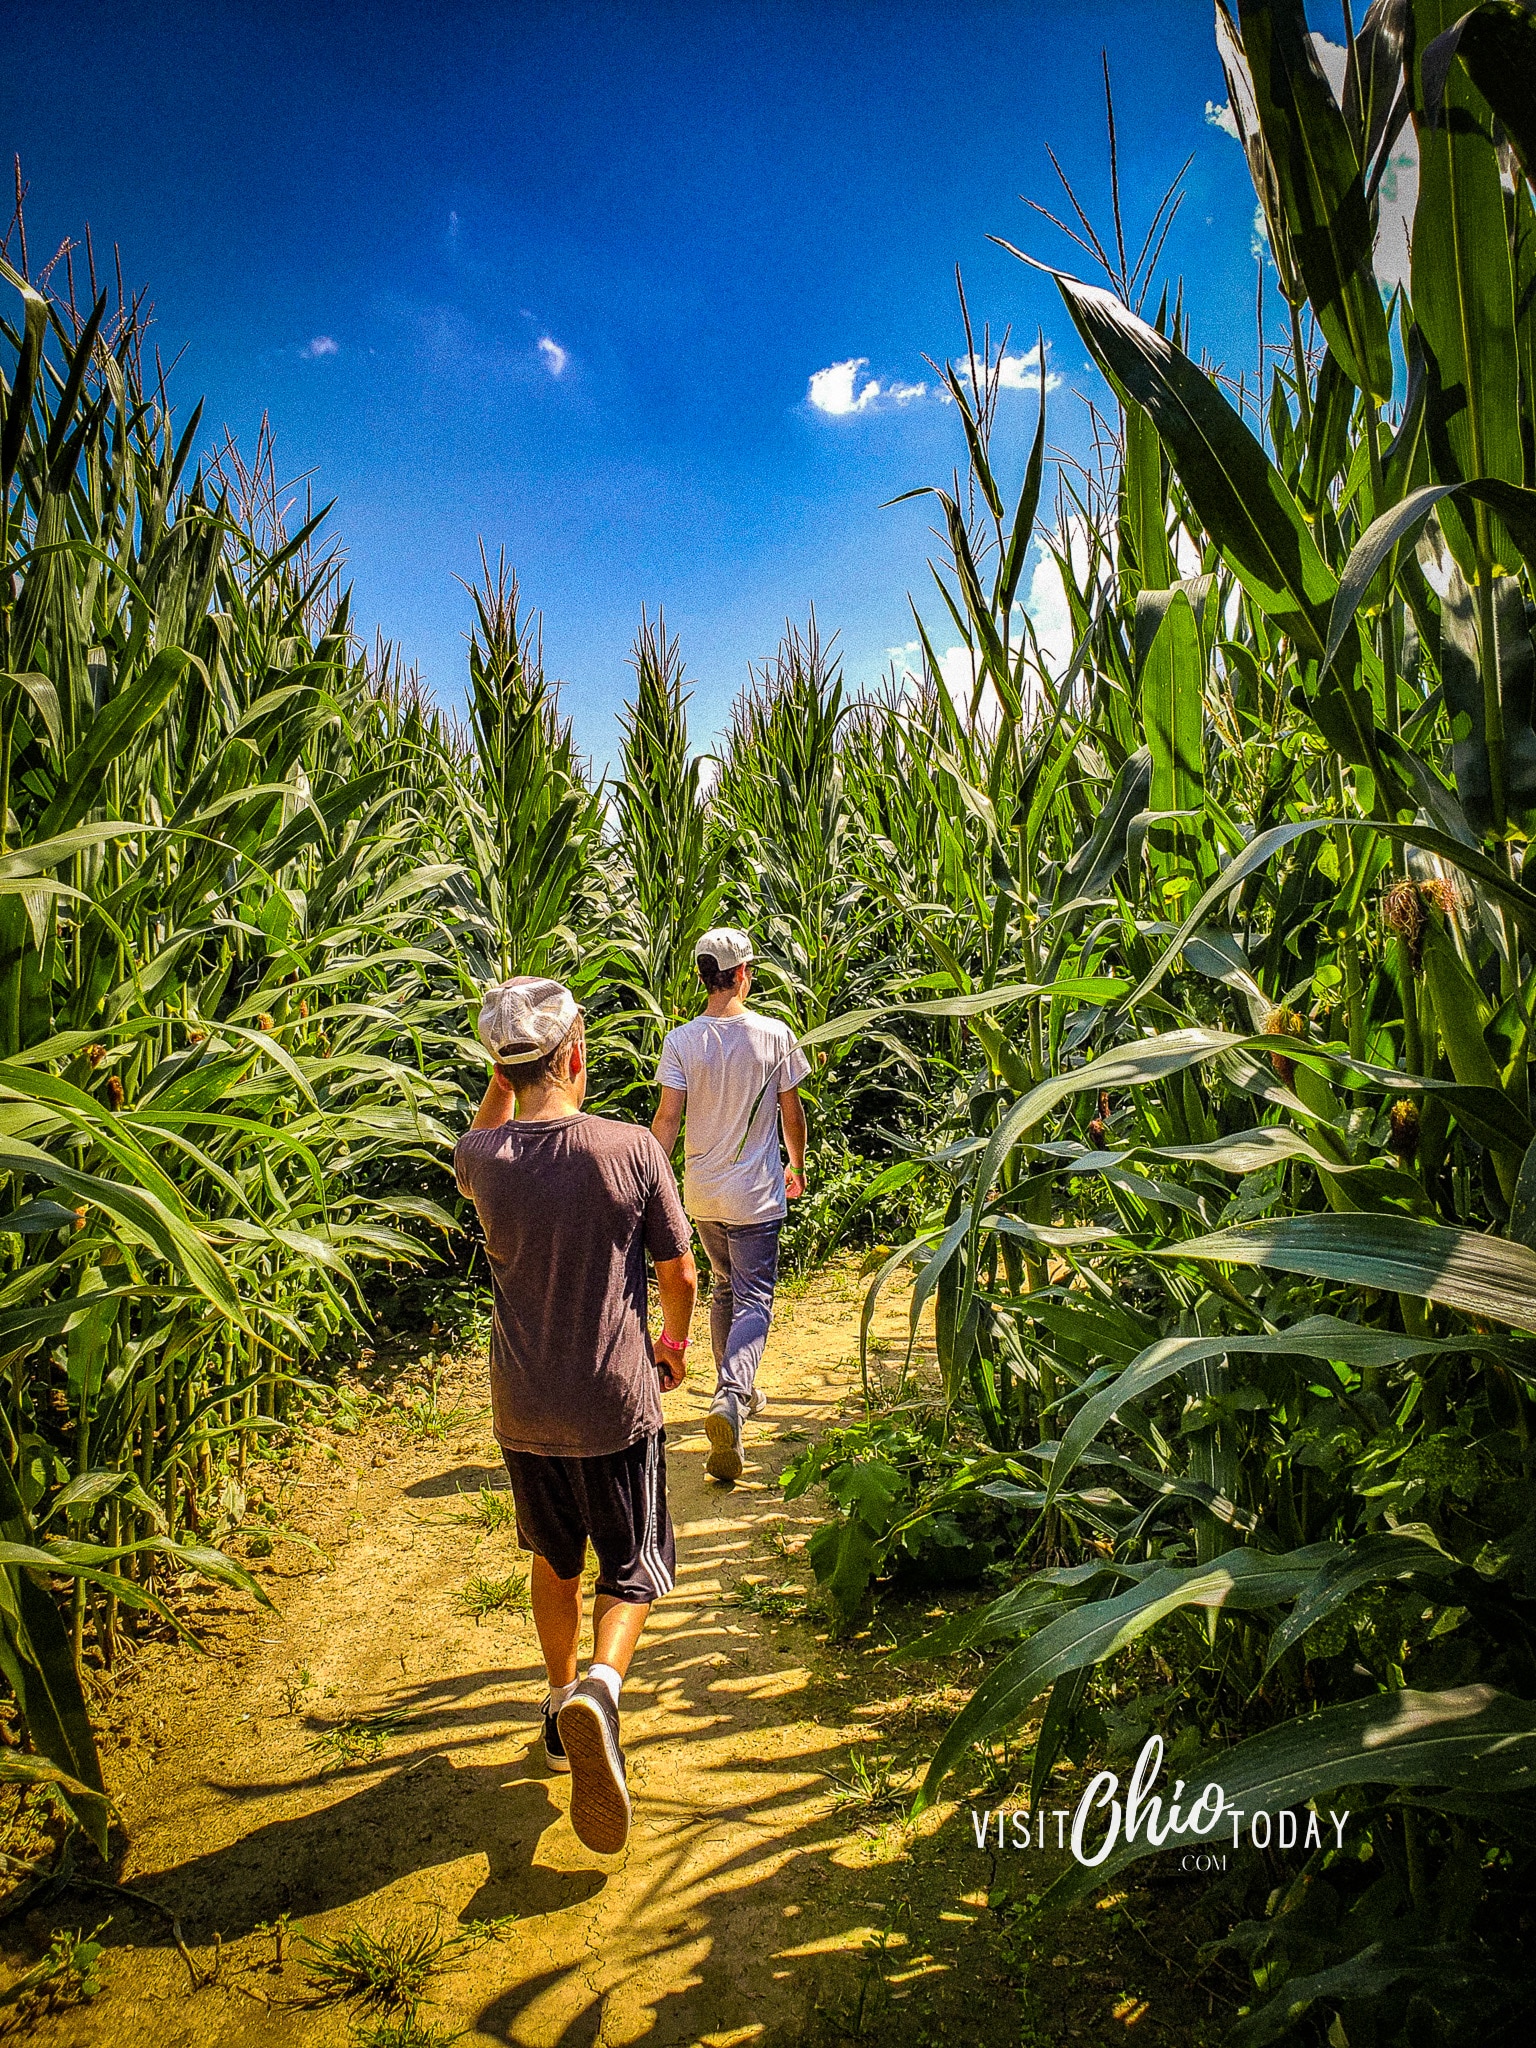 photo of a young boy and man walking on a dirt path through corn field